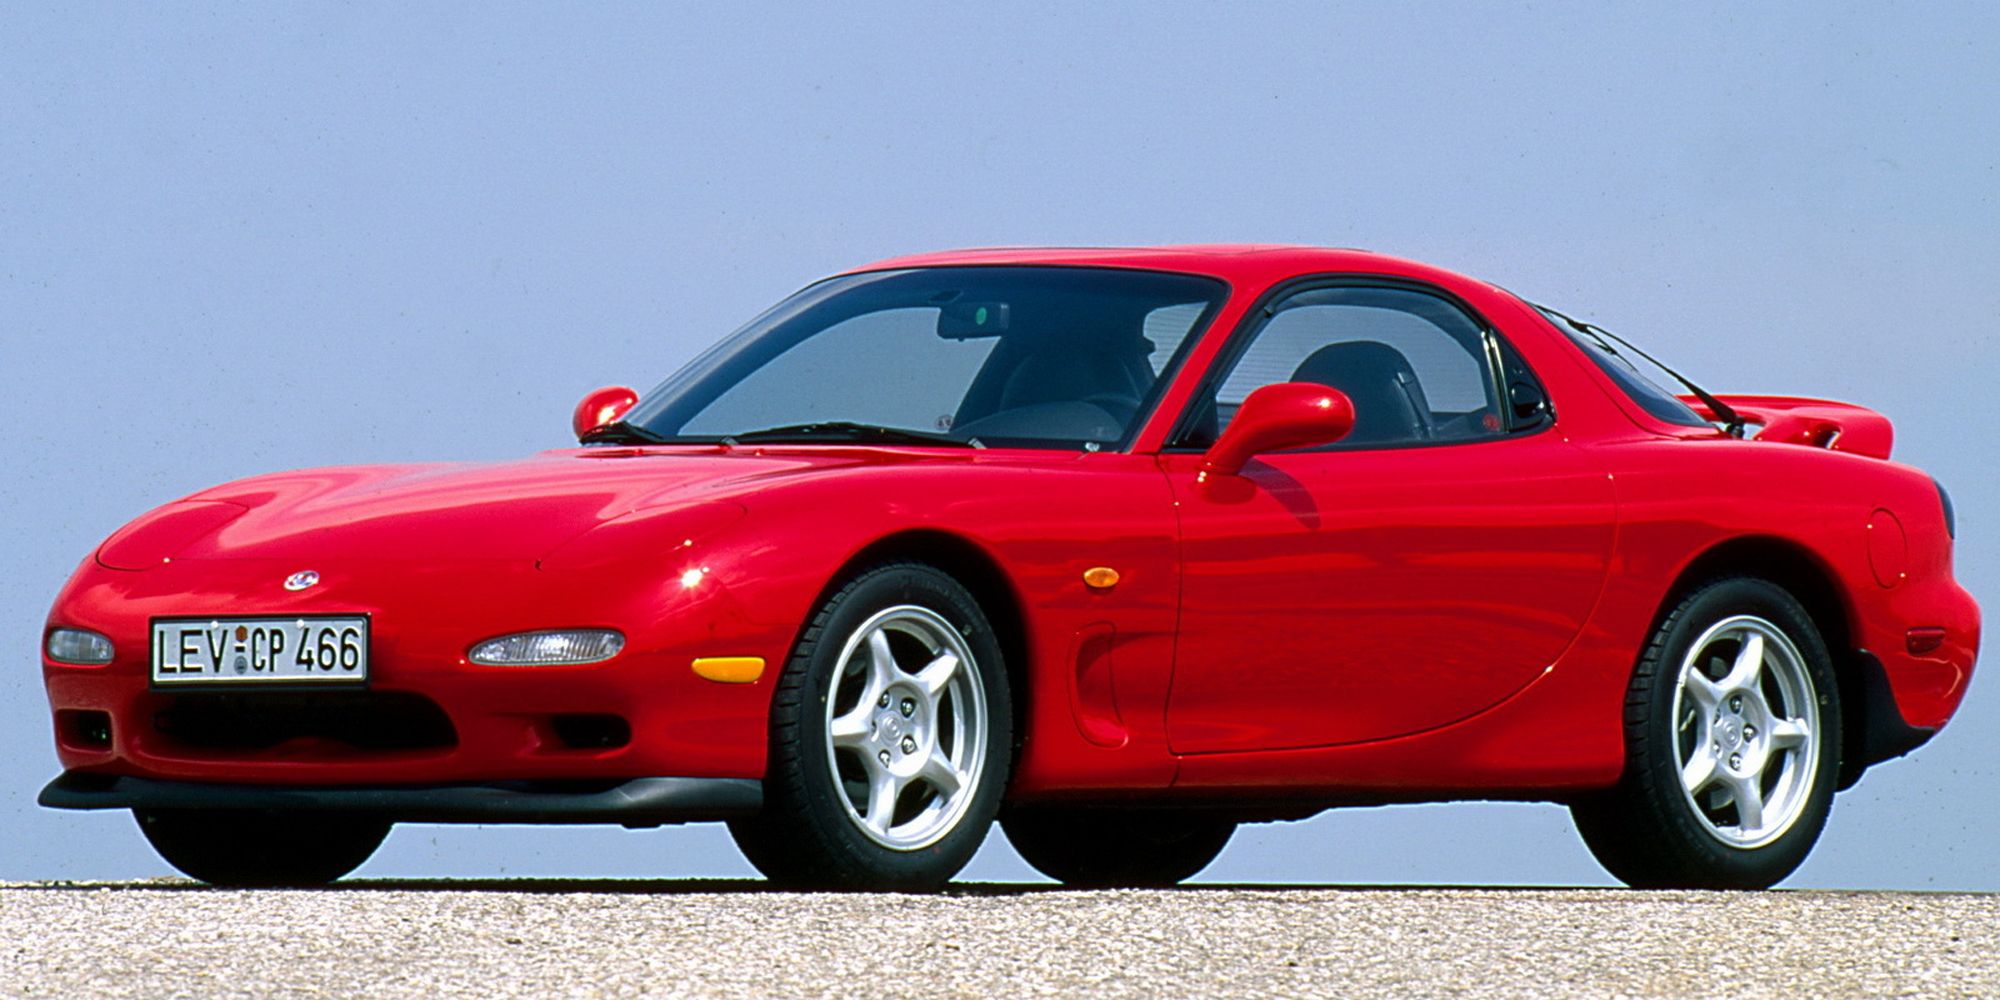 Front 3/4 view of a red FD RX-7